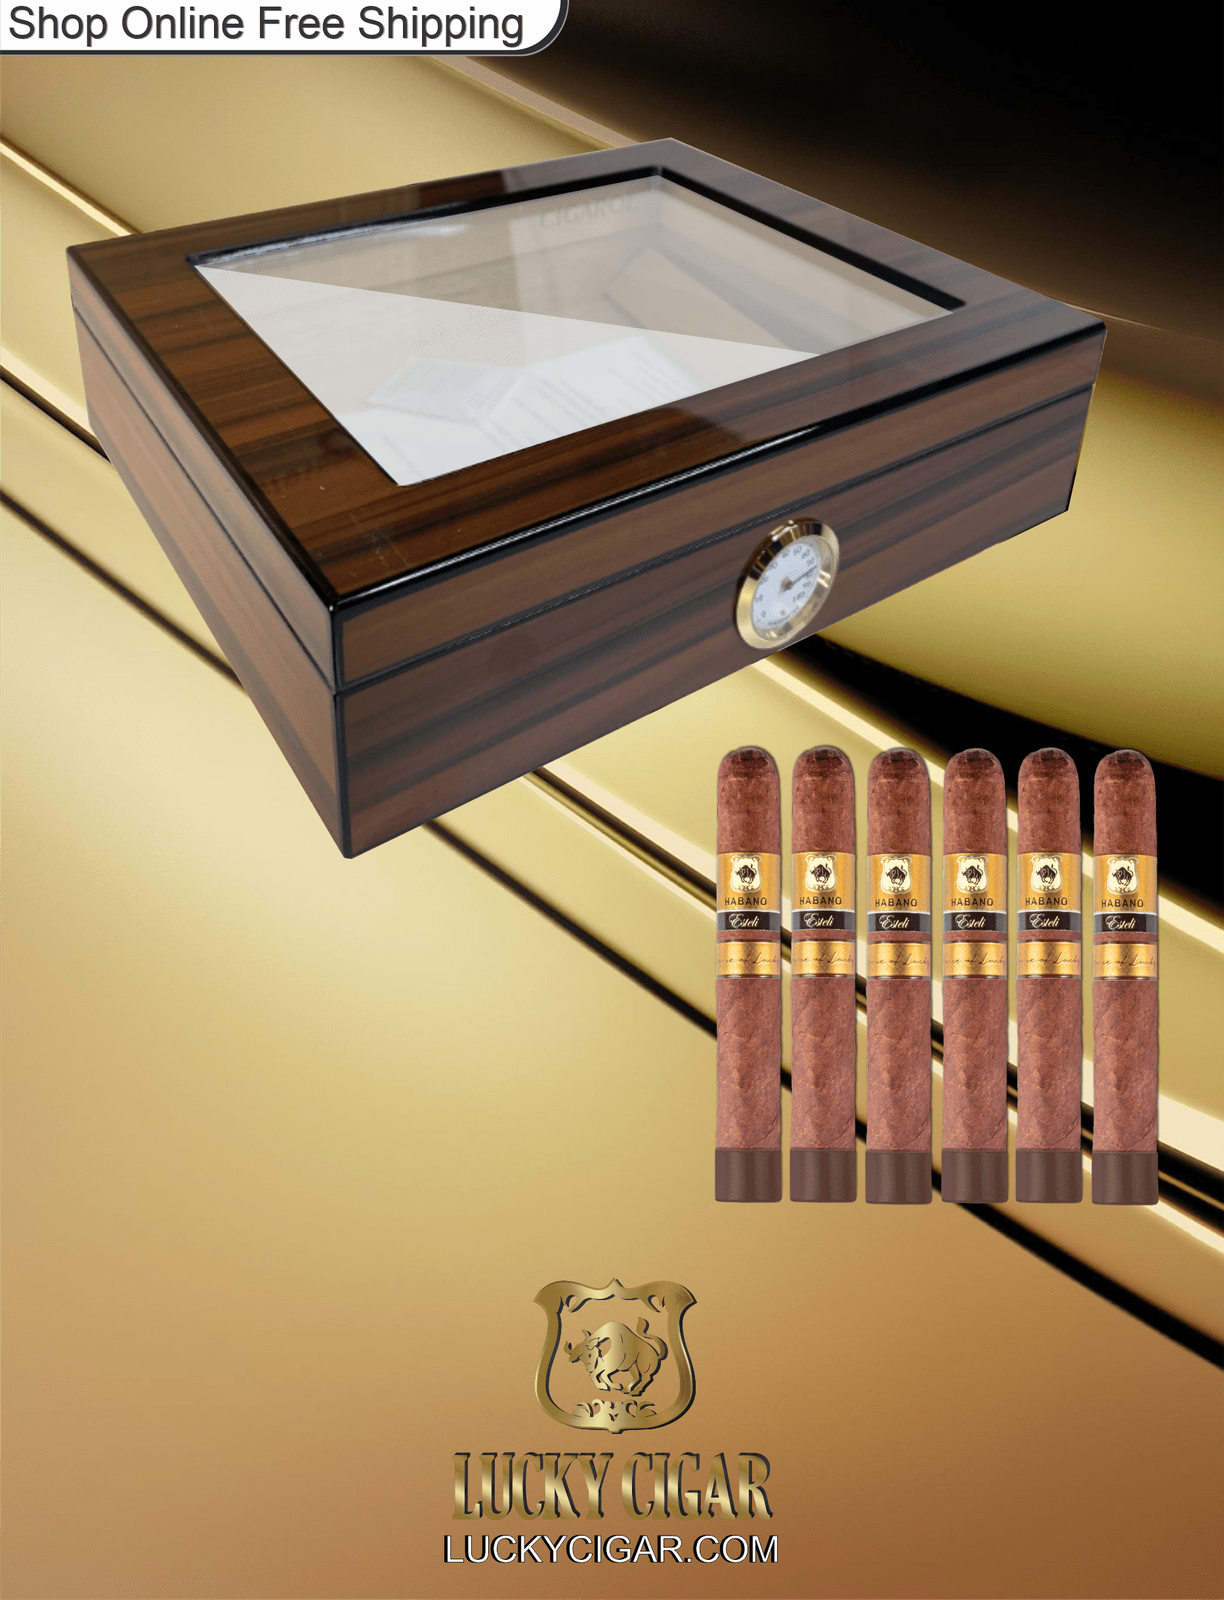 Cigar Lifestyle Accessories: Set of 6 Habano Cigars with Humidor